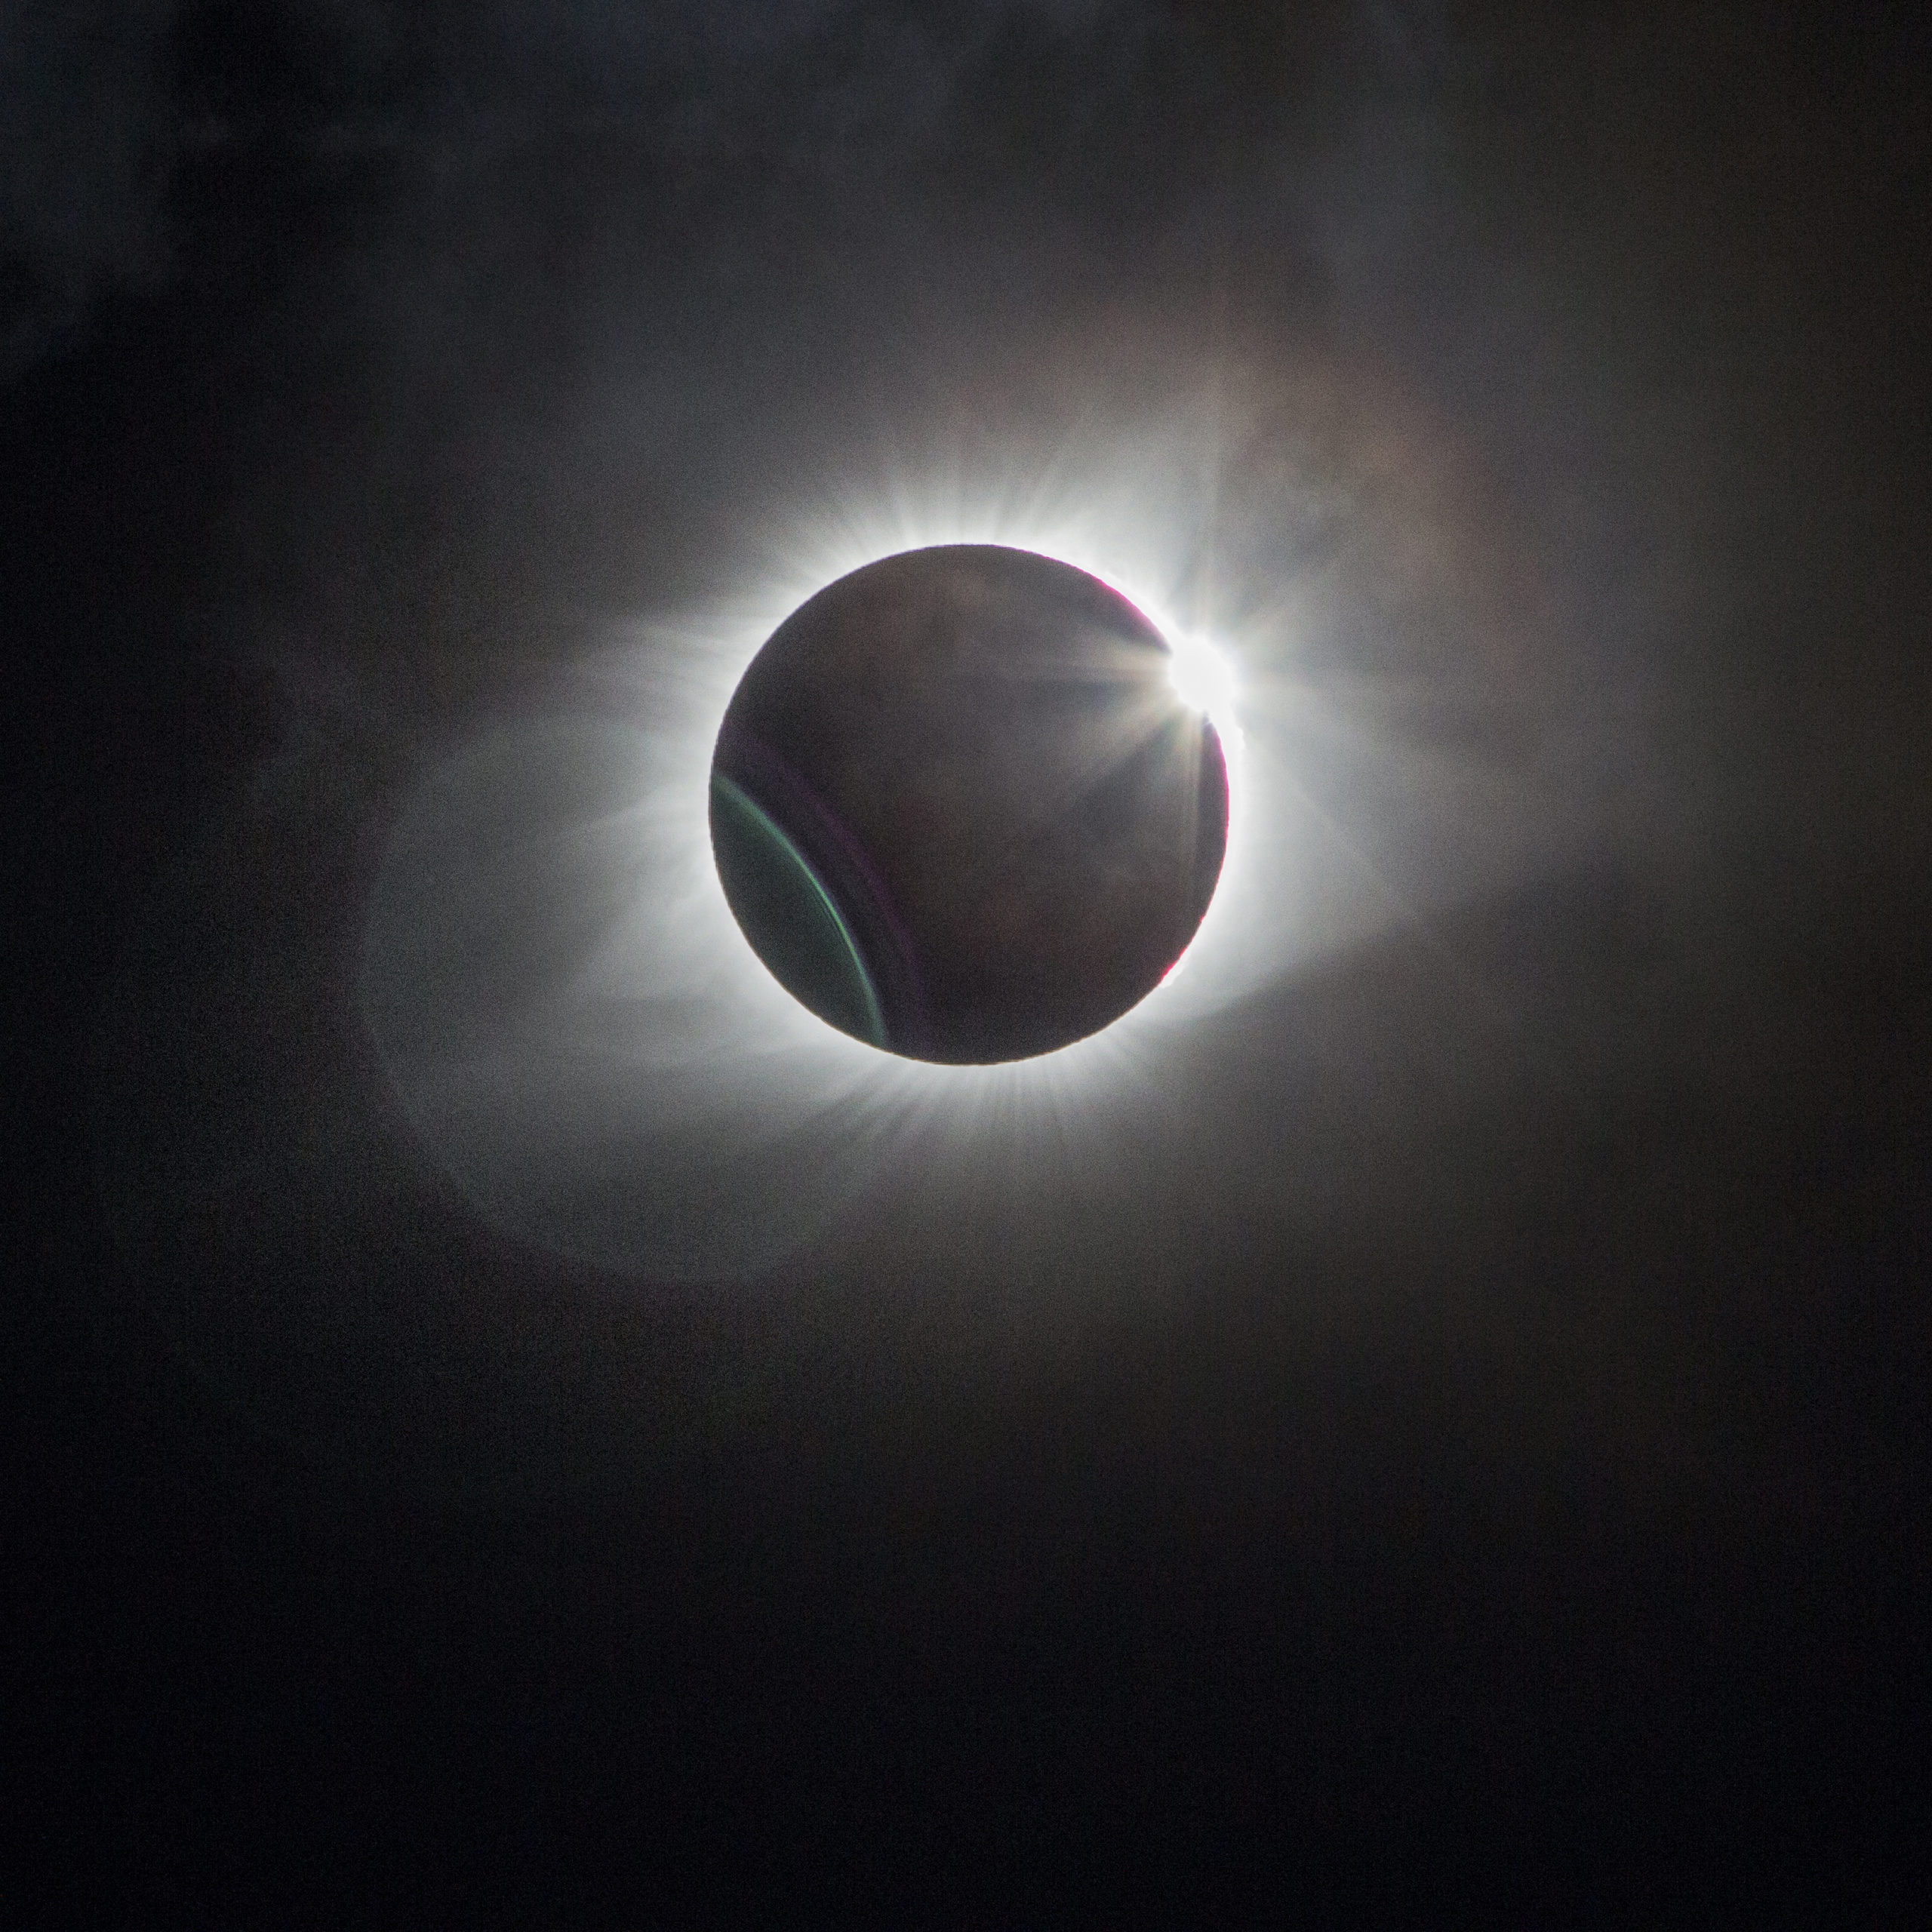 Total solar eclipse from August 21, 2017.